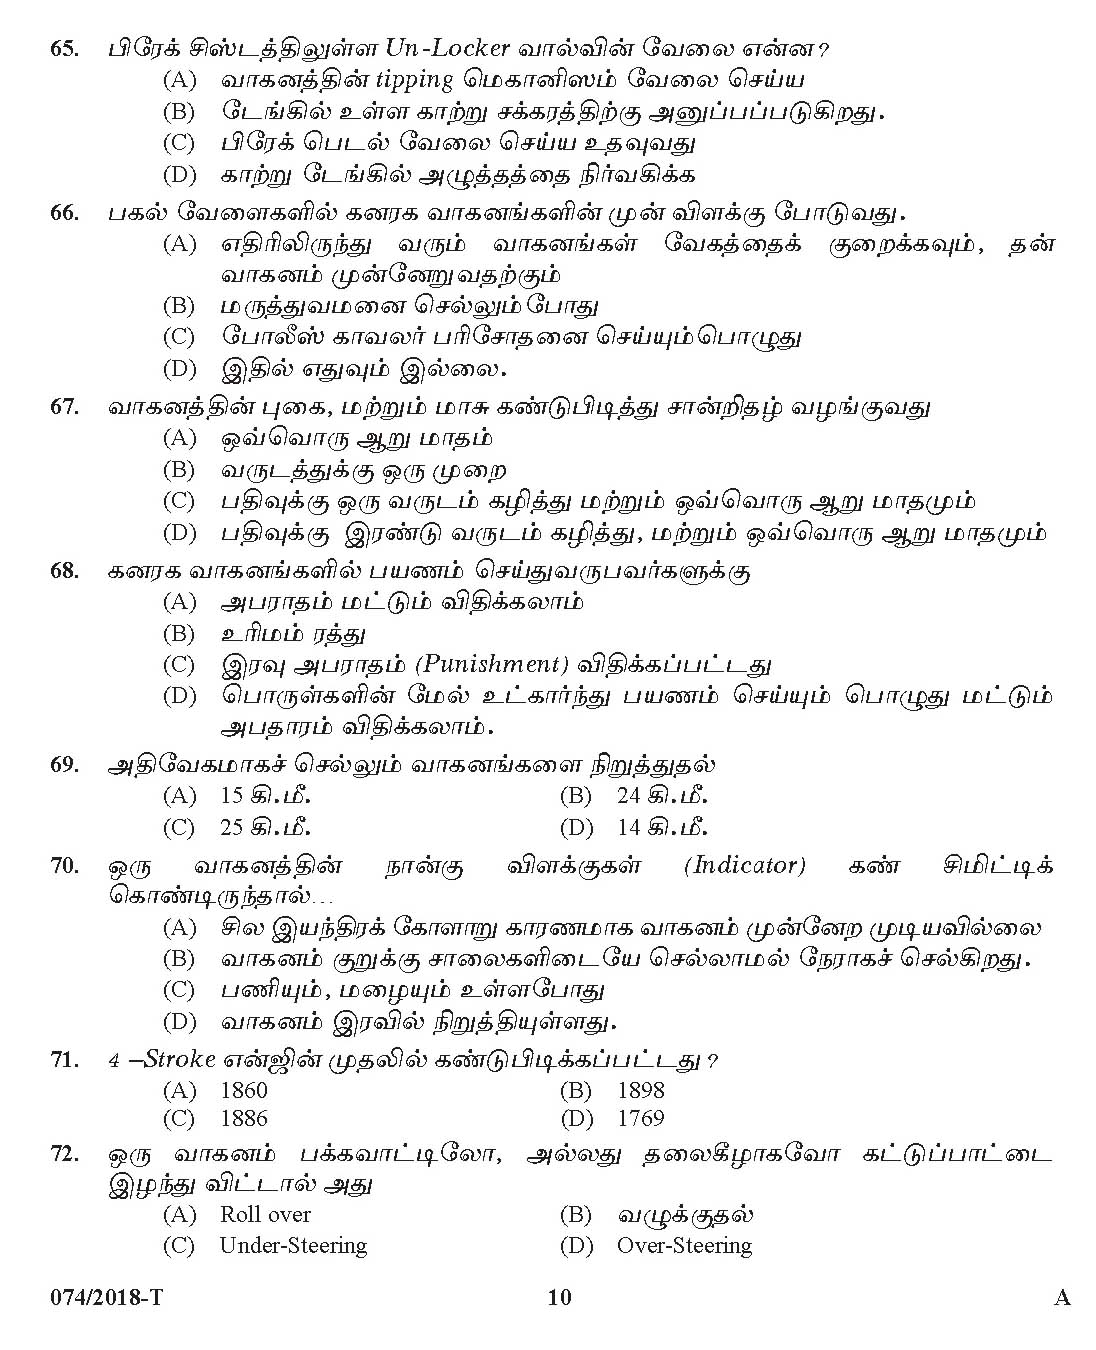 Kerala PSC Police Constable Driver Exam 2018 Question Paper Code 0742018 T 9